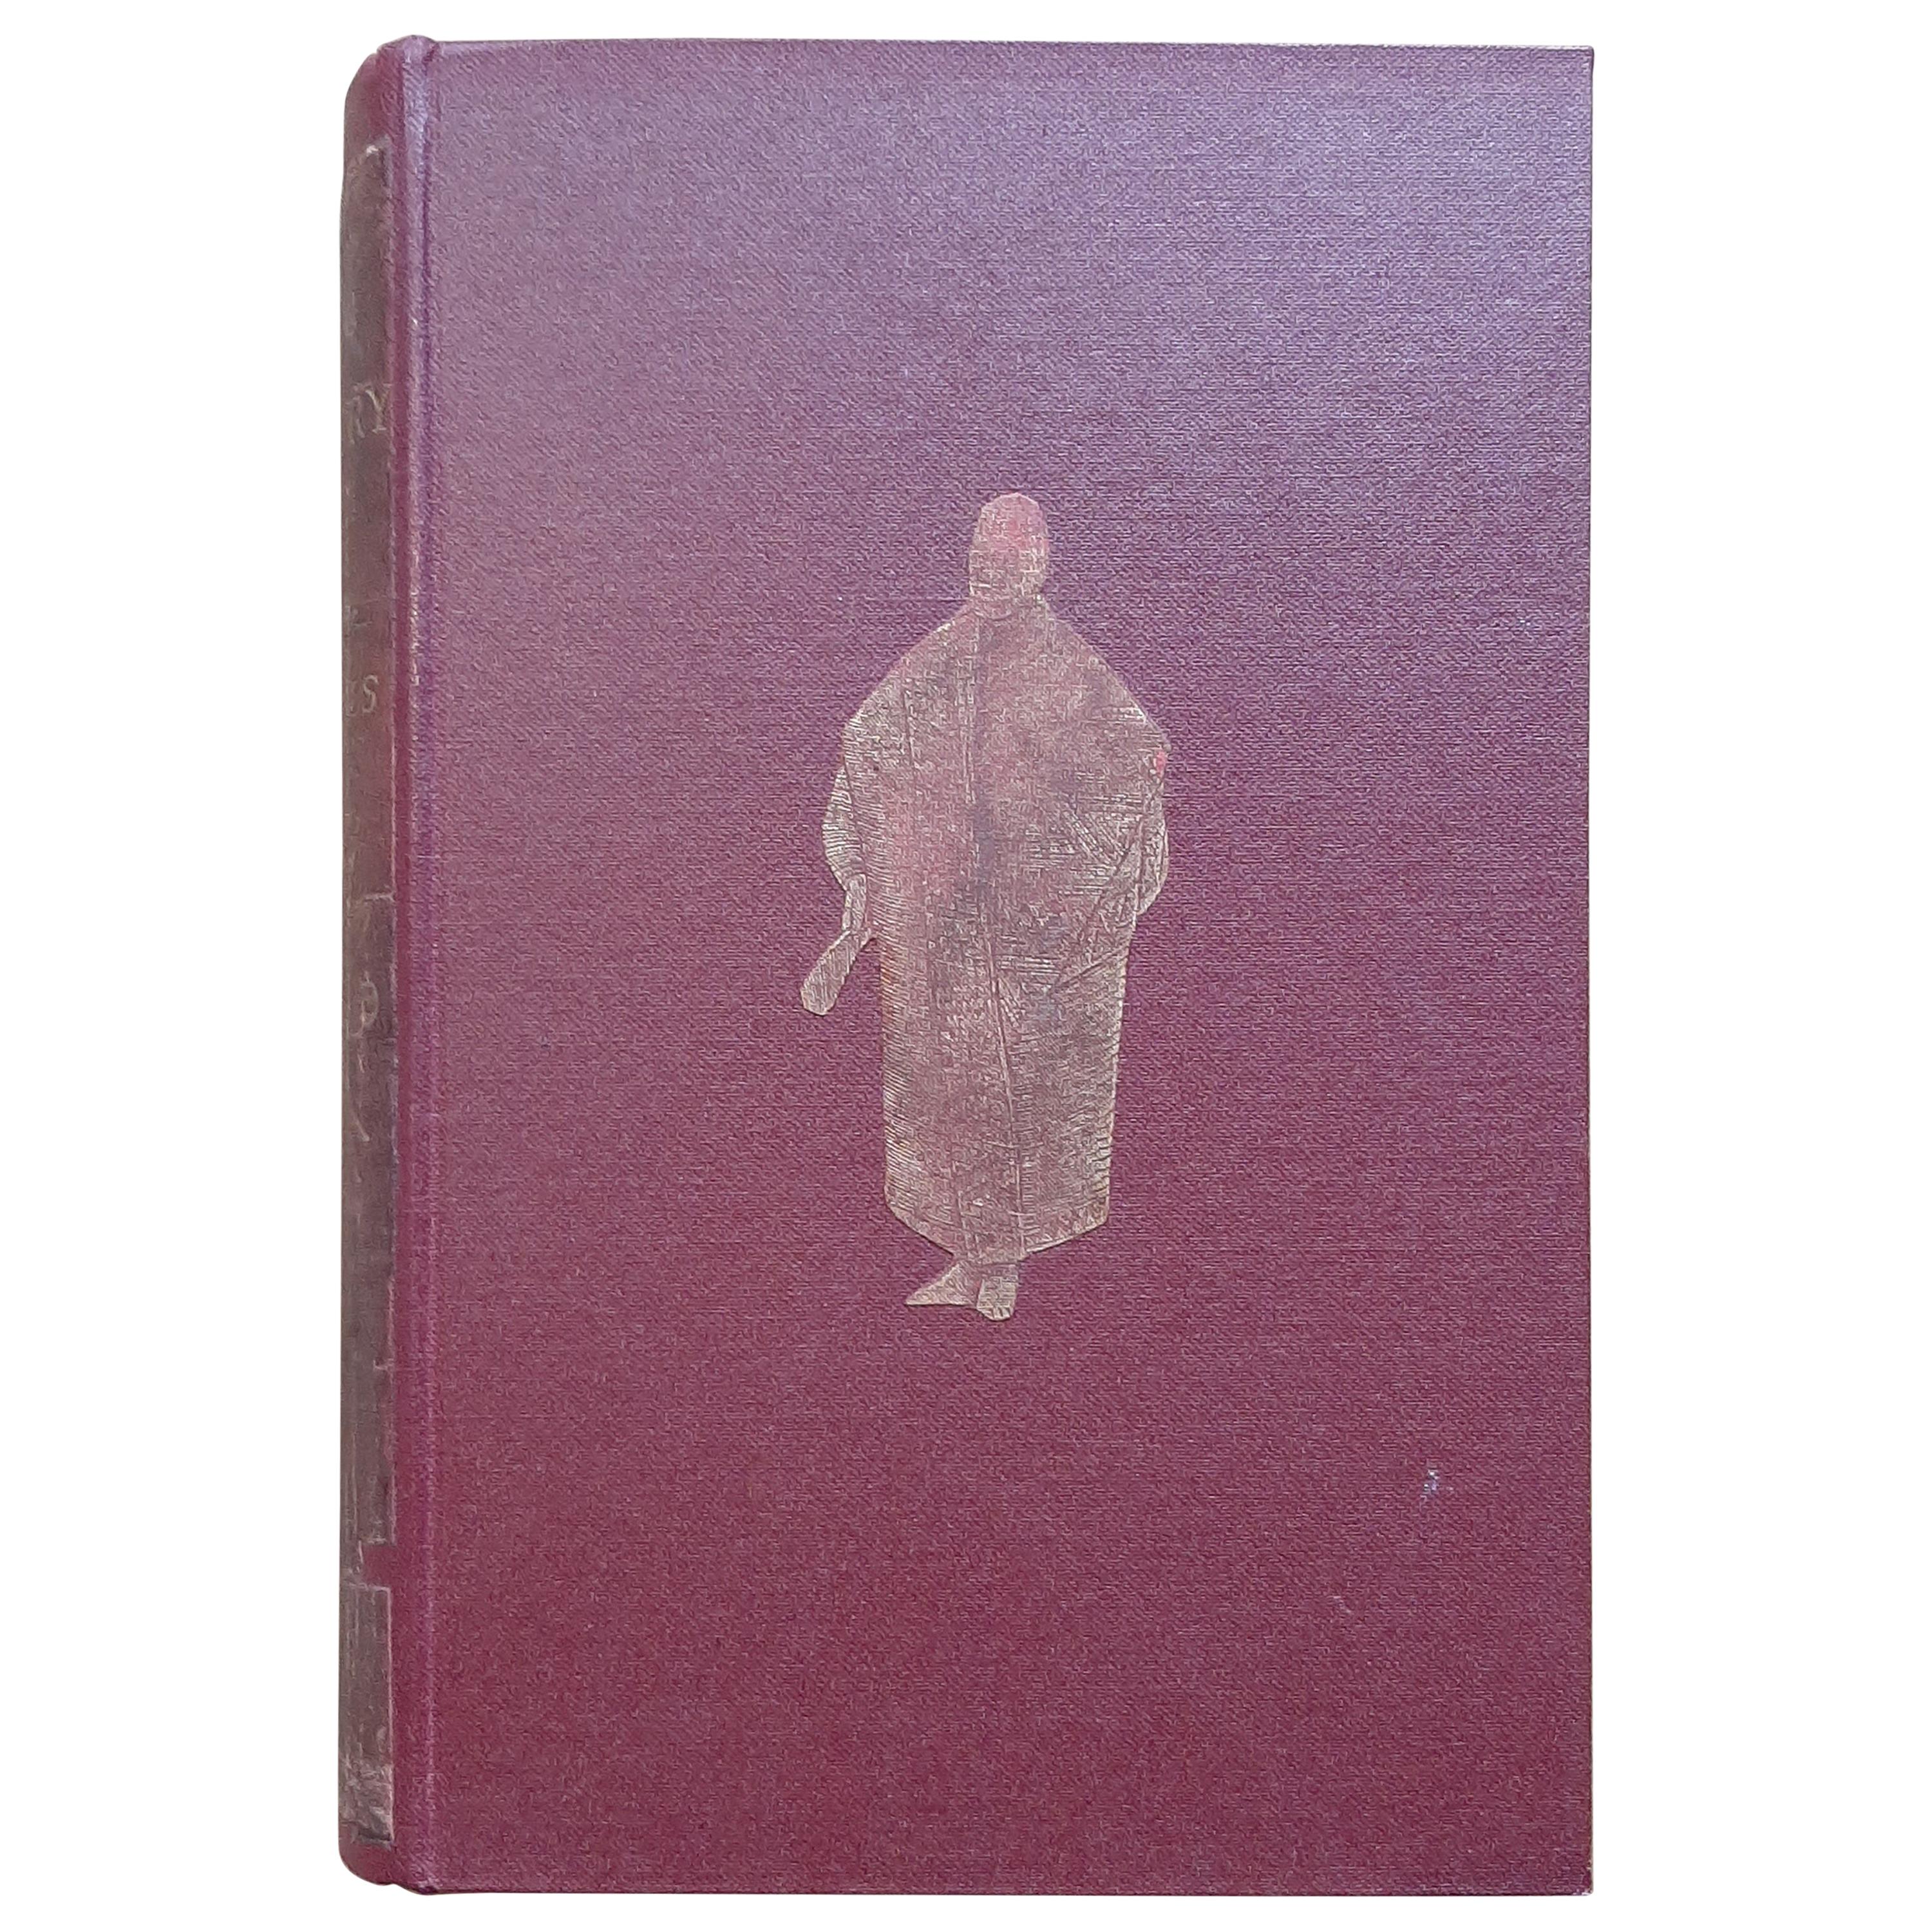 The King-Country; or, Explorations in New-Zealand by Kerry-Nicholls (1884) For Sale